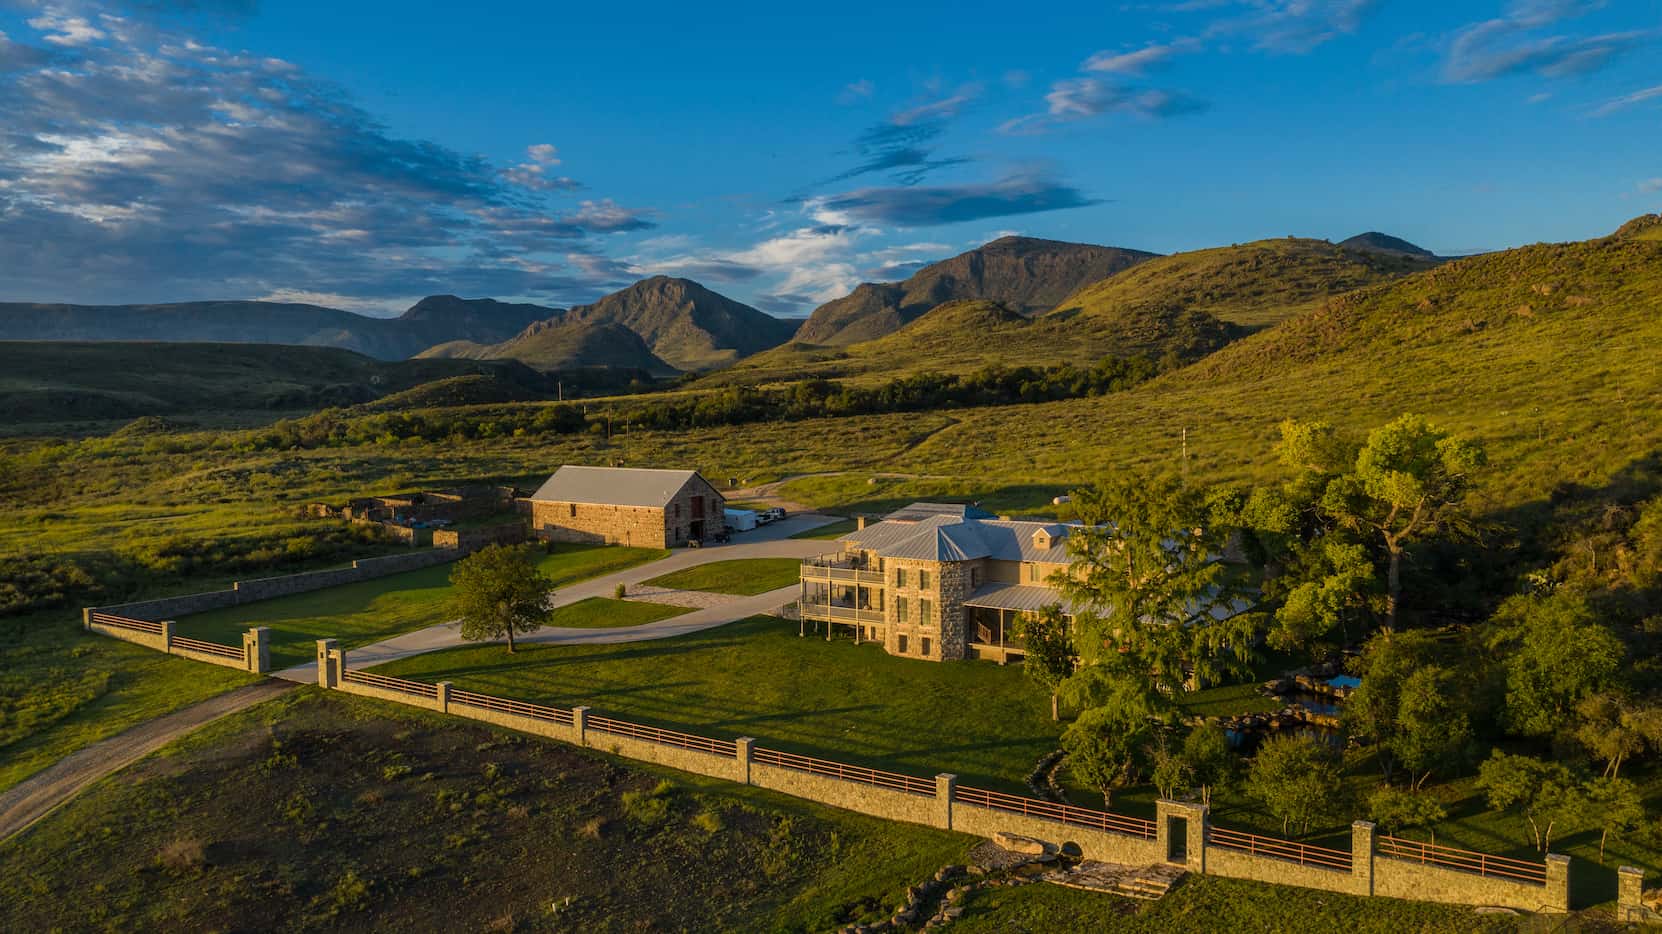 The KC7 Ranch includes a nearly 10,000-square-foot lodge that dates from the 1890s.